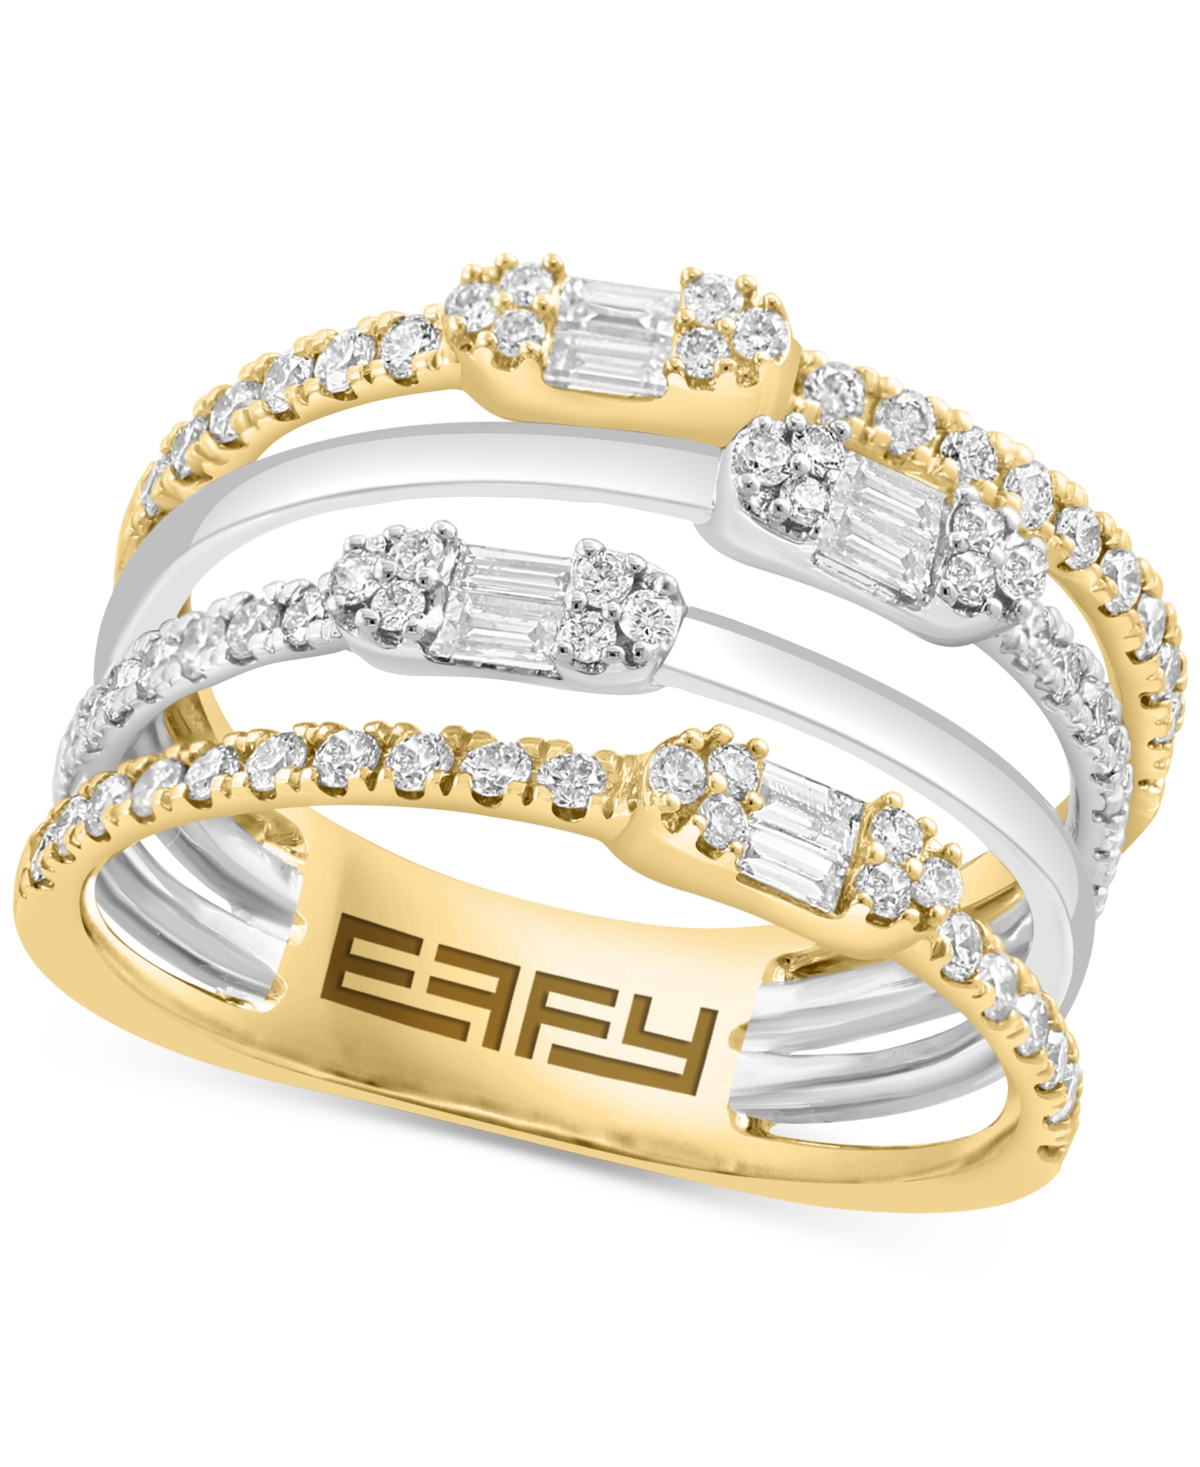 Effy Diamond Baguette & Round Multirow Statement Ring (3/4 ct. t.w.) in 14k Two-Tone Gold - Ylw/wht Go